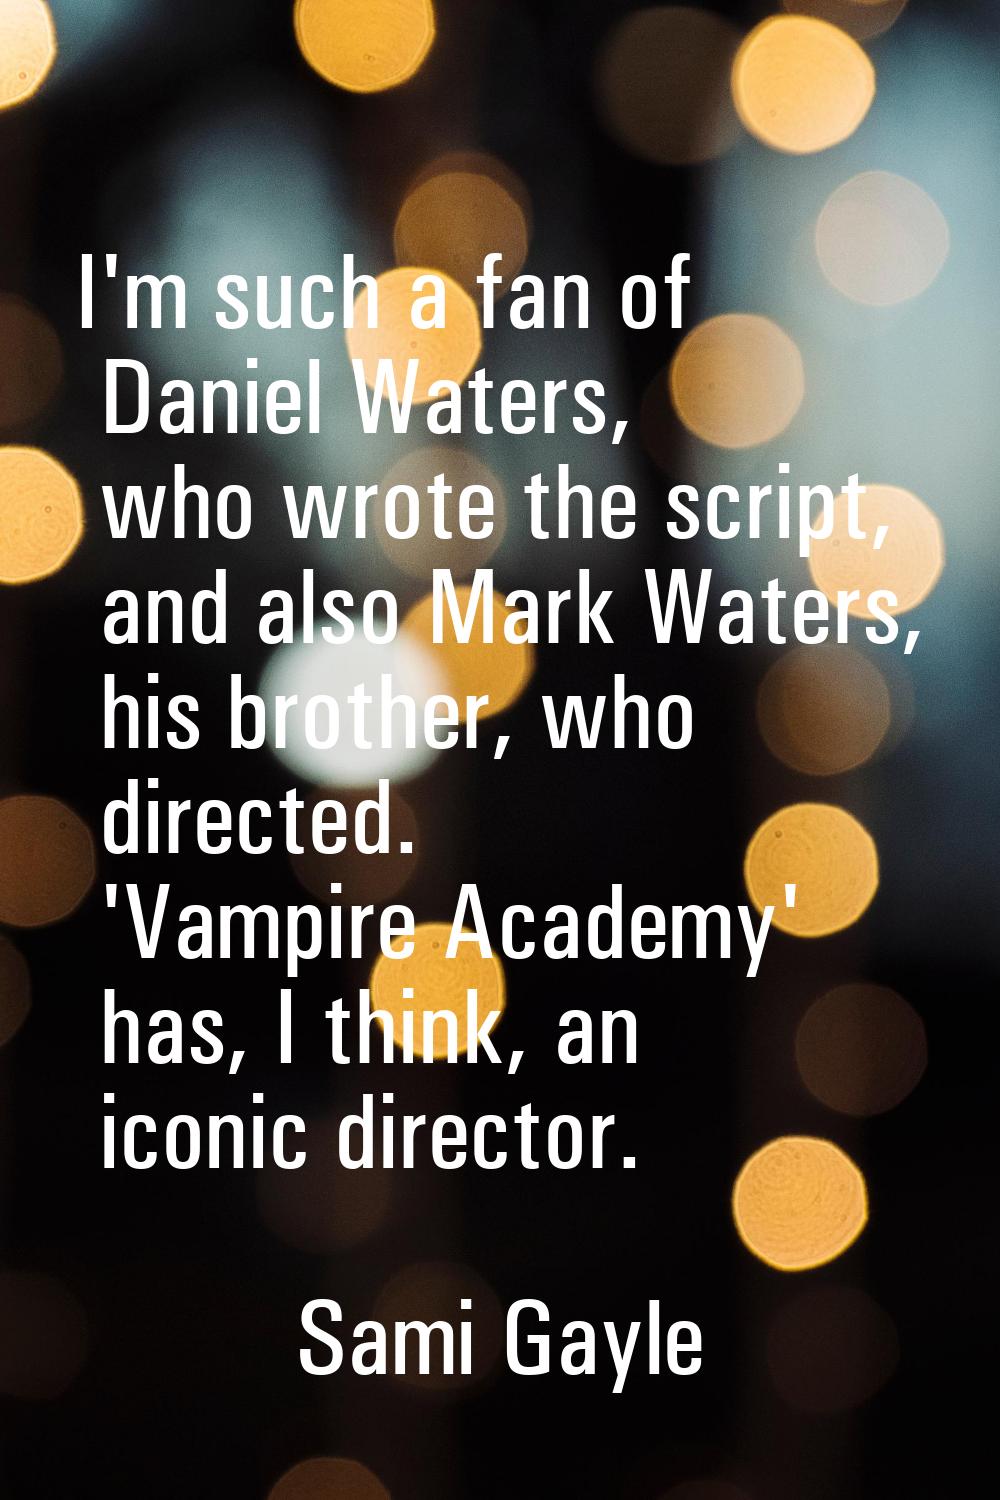 I'm such a fan of Daniel Waters, who wrote the script, and also Mark Waters, his brother, who direc